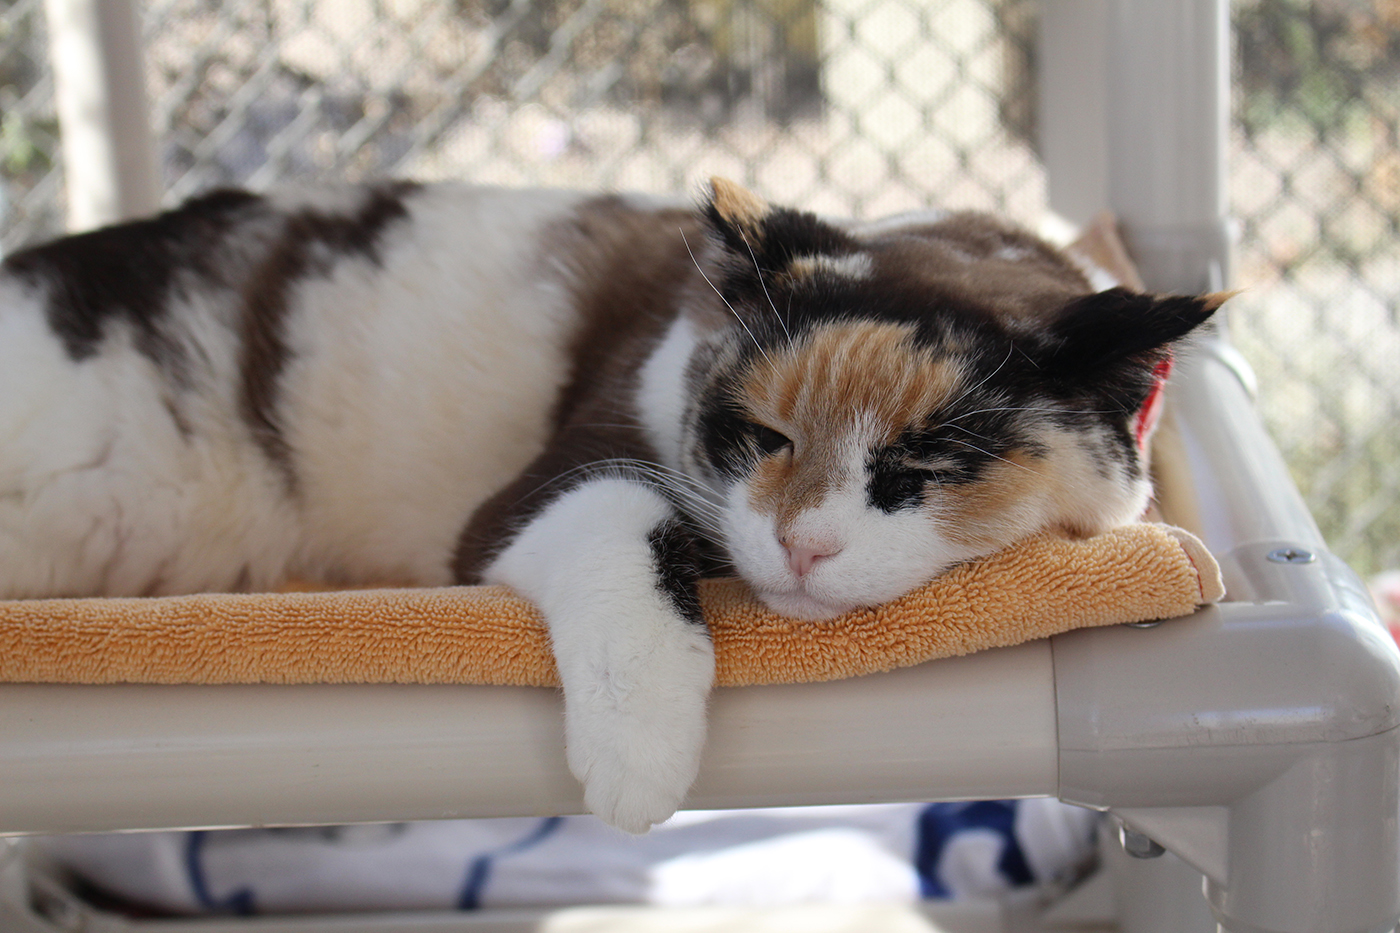 The Cal Poly Cat Program has helped find homes for more than 3,000 cats